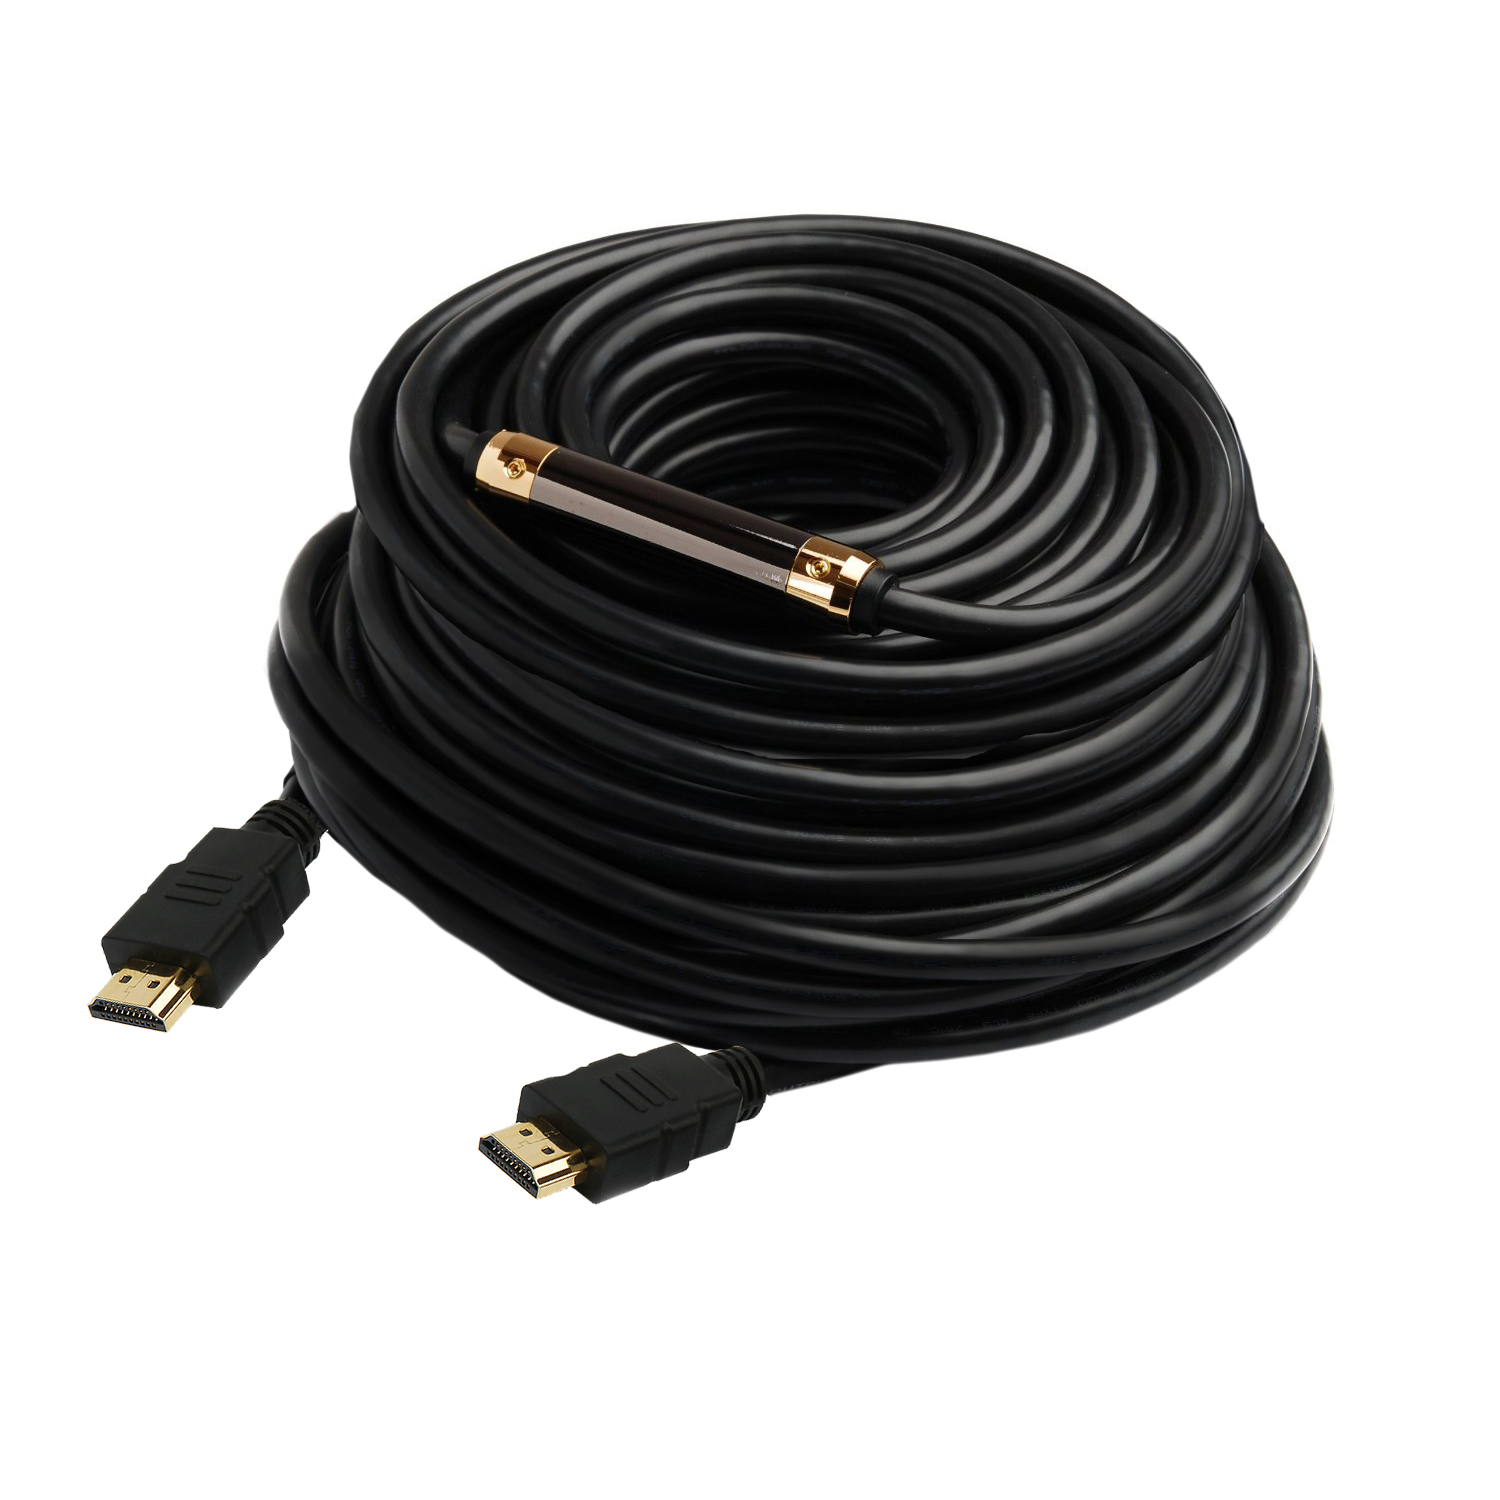 500243BK/100 - High Speed HDMI 2.0 Cable with Chipset, OD 8.0mm 4K/2K at 60Hz - 26 AWG - 100ft